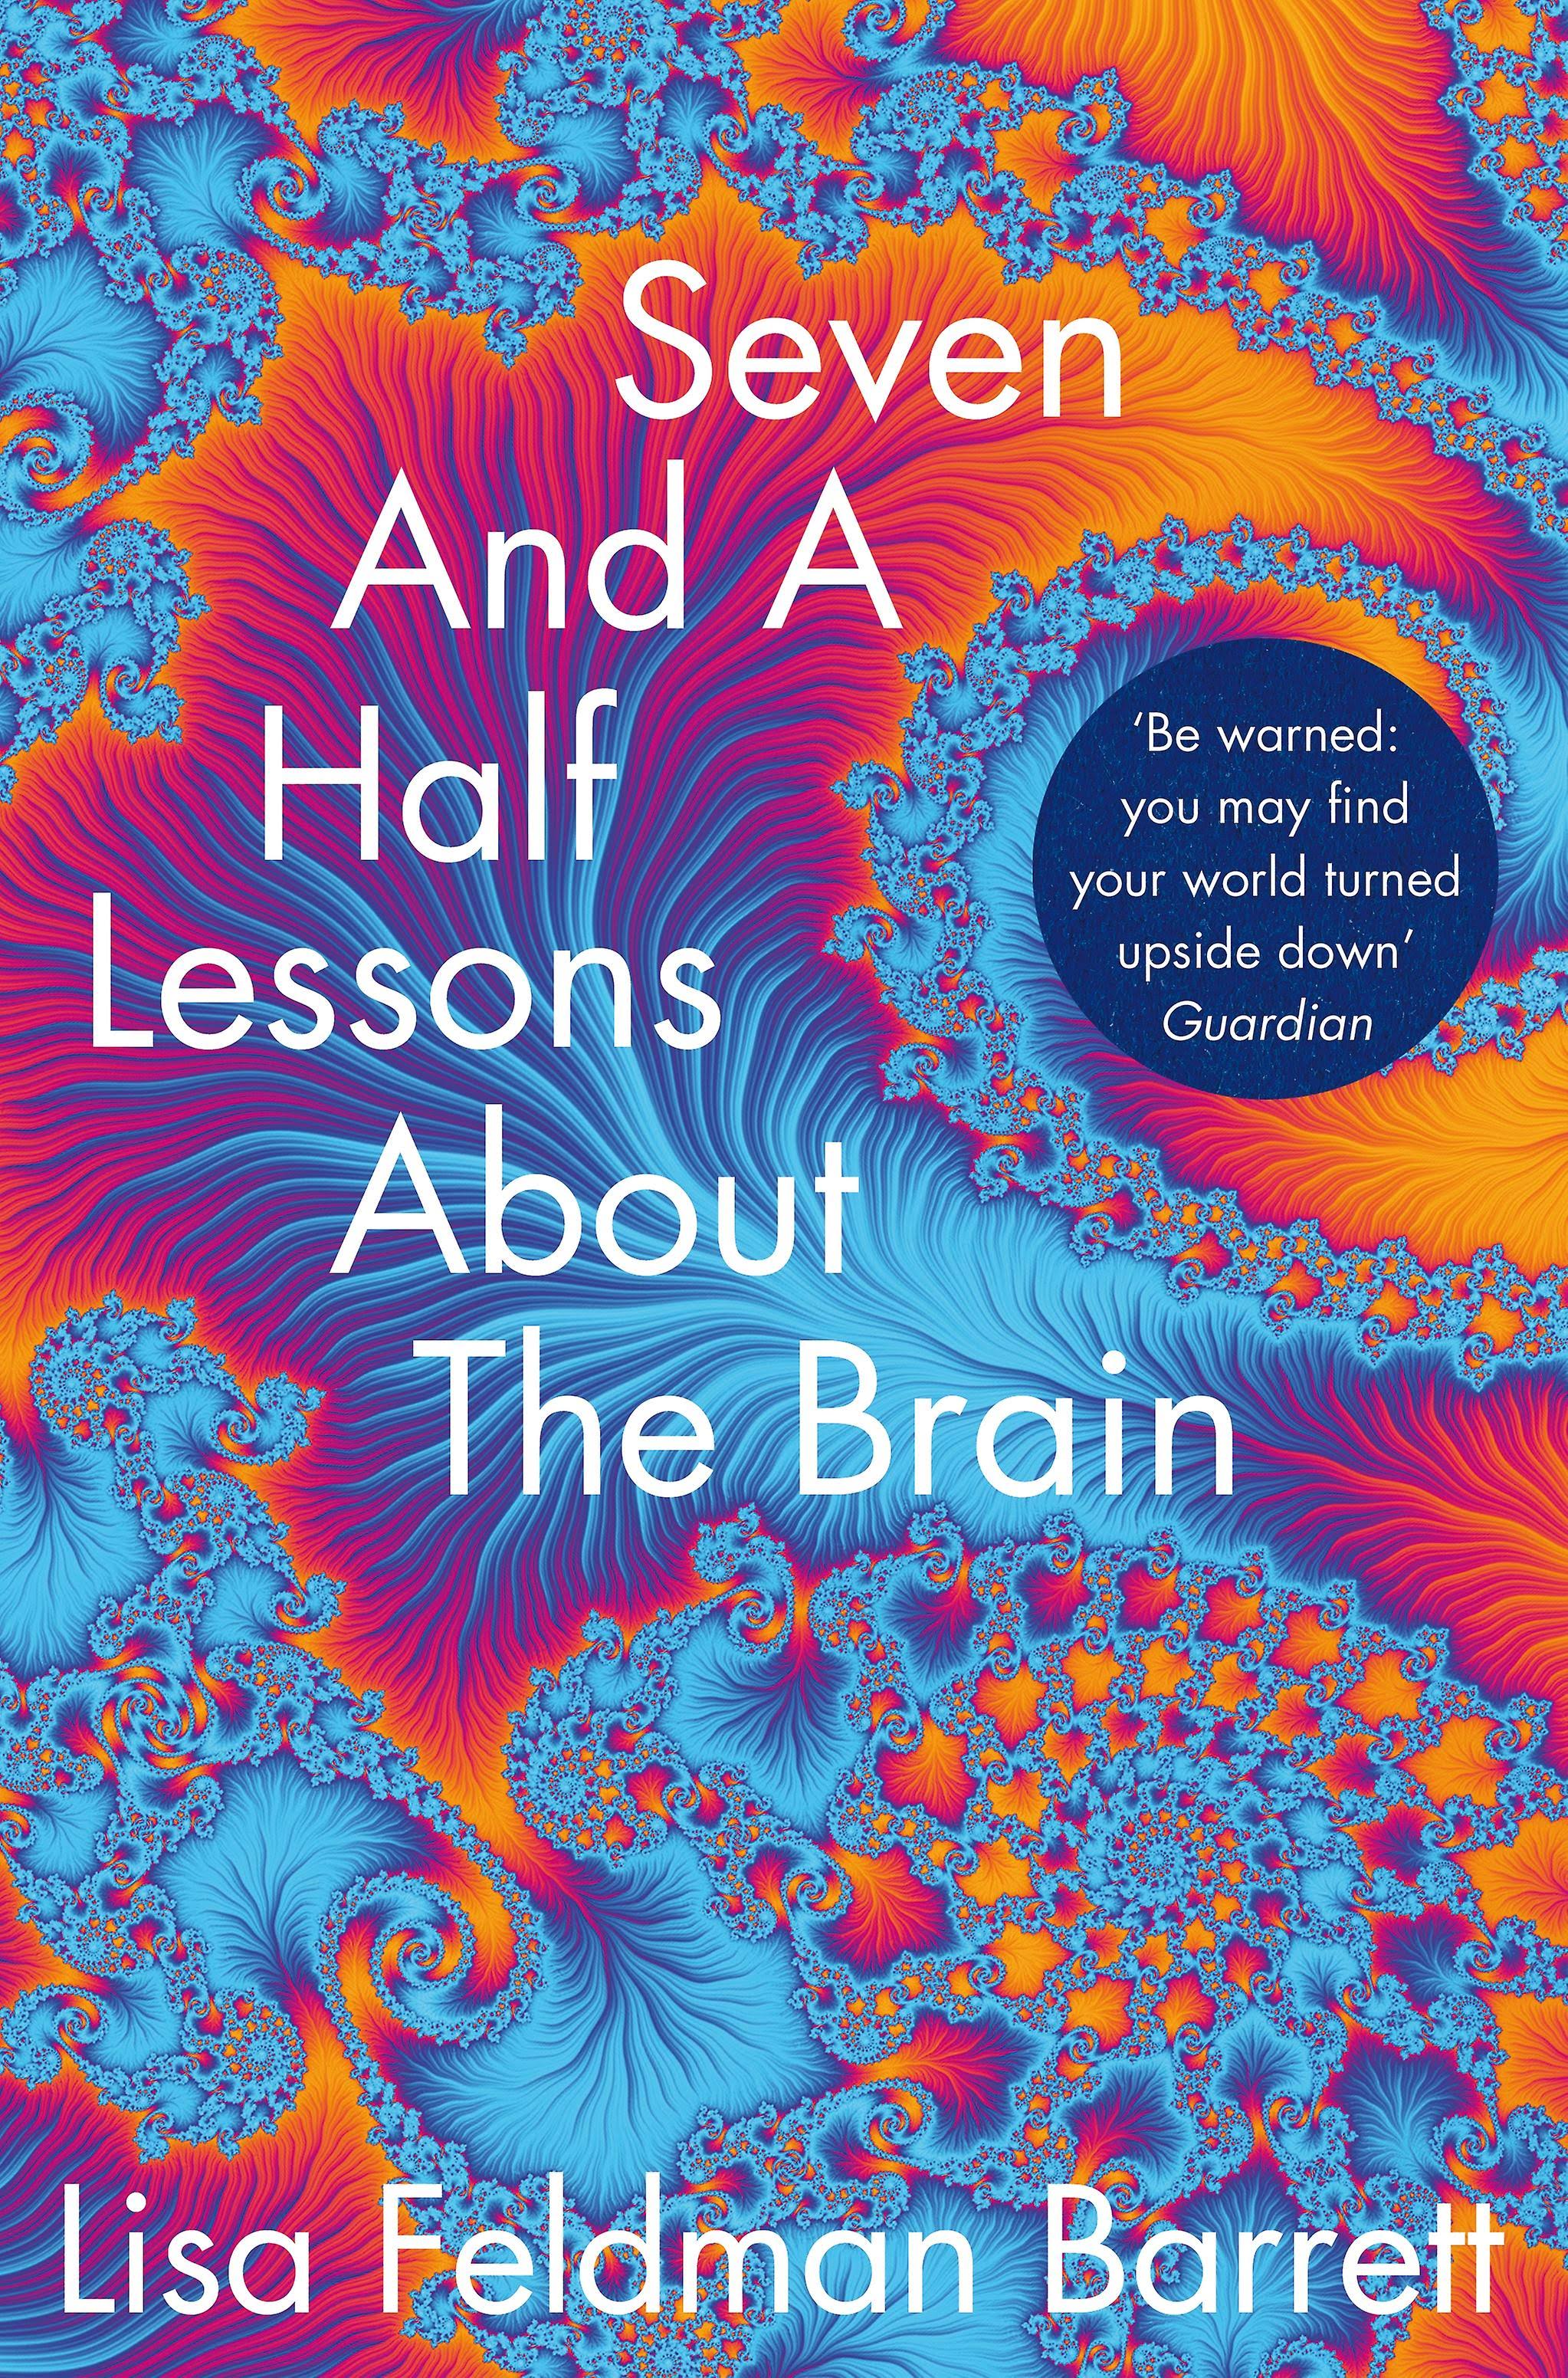 Seven and a Half Lessons about the Brain [Book]